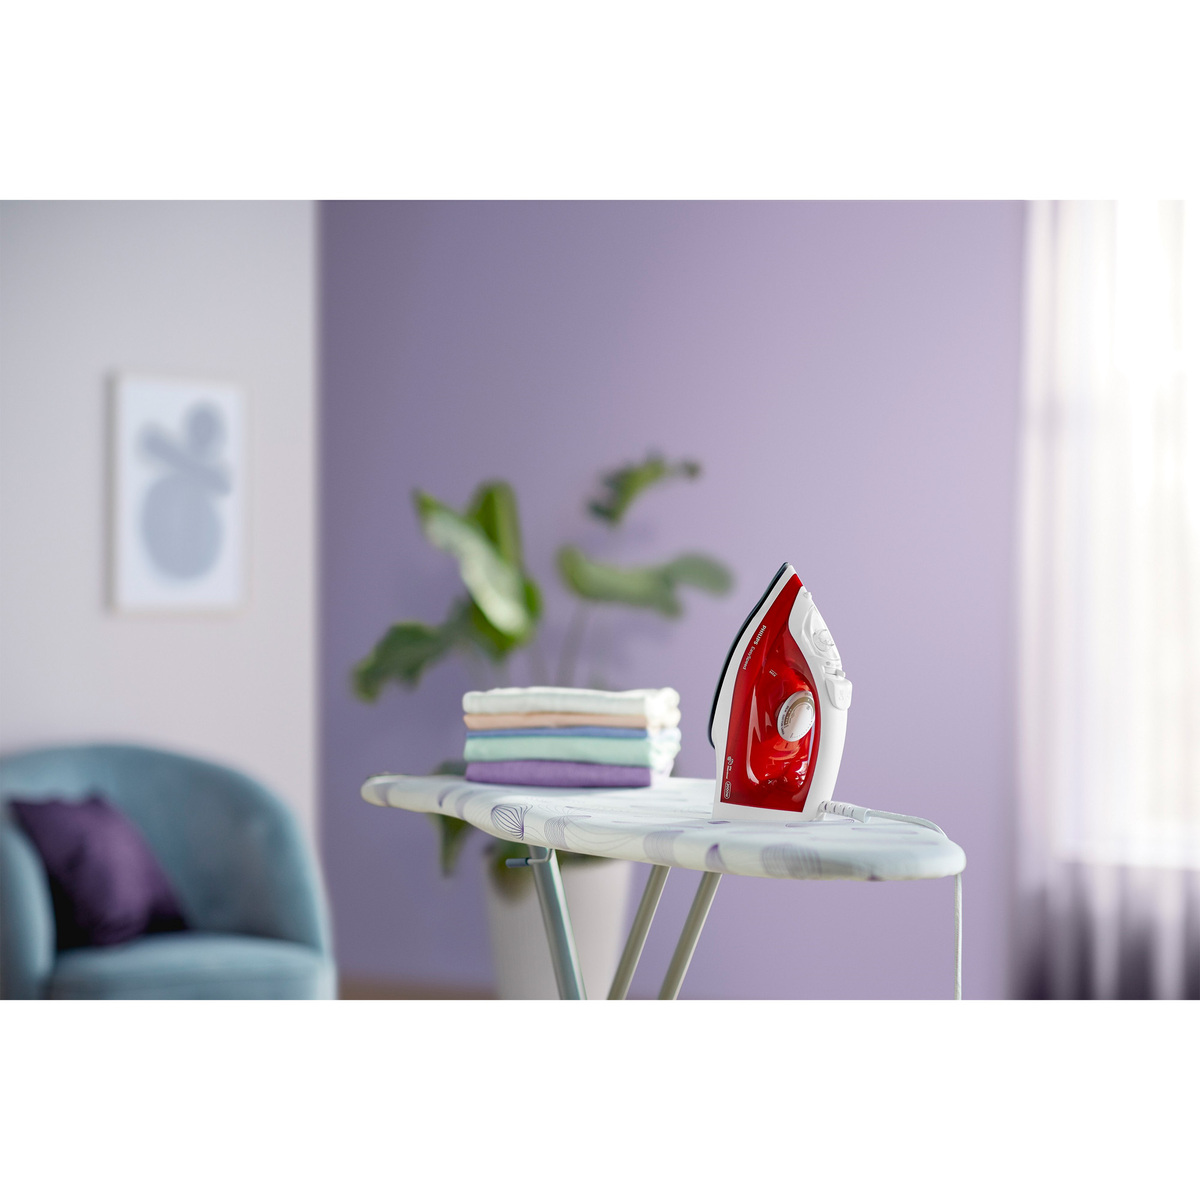 Philips EasySpeed Steam Iron, 2000 W, Red, GC1742/46